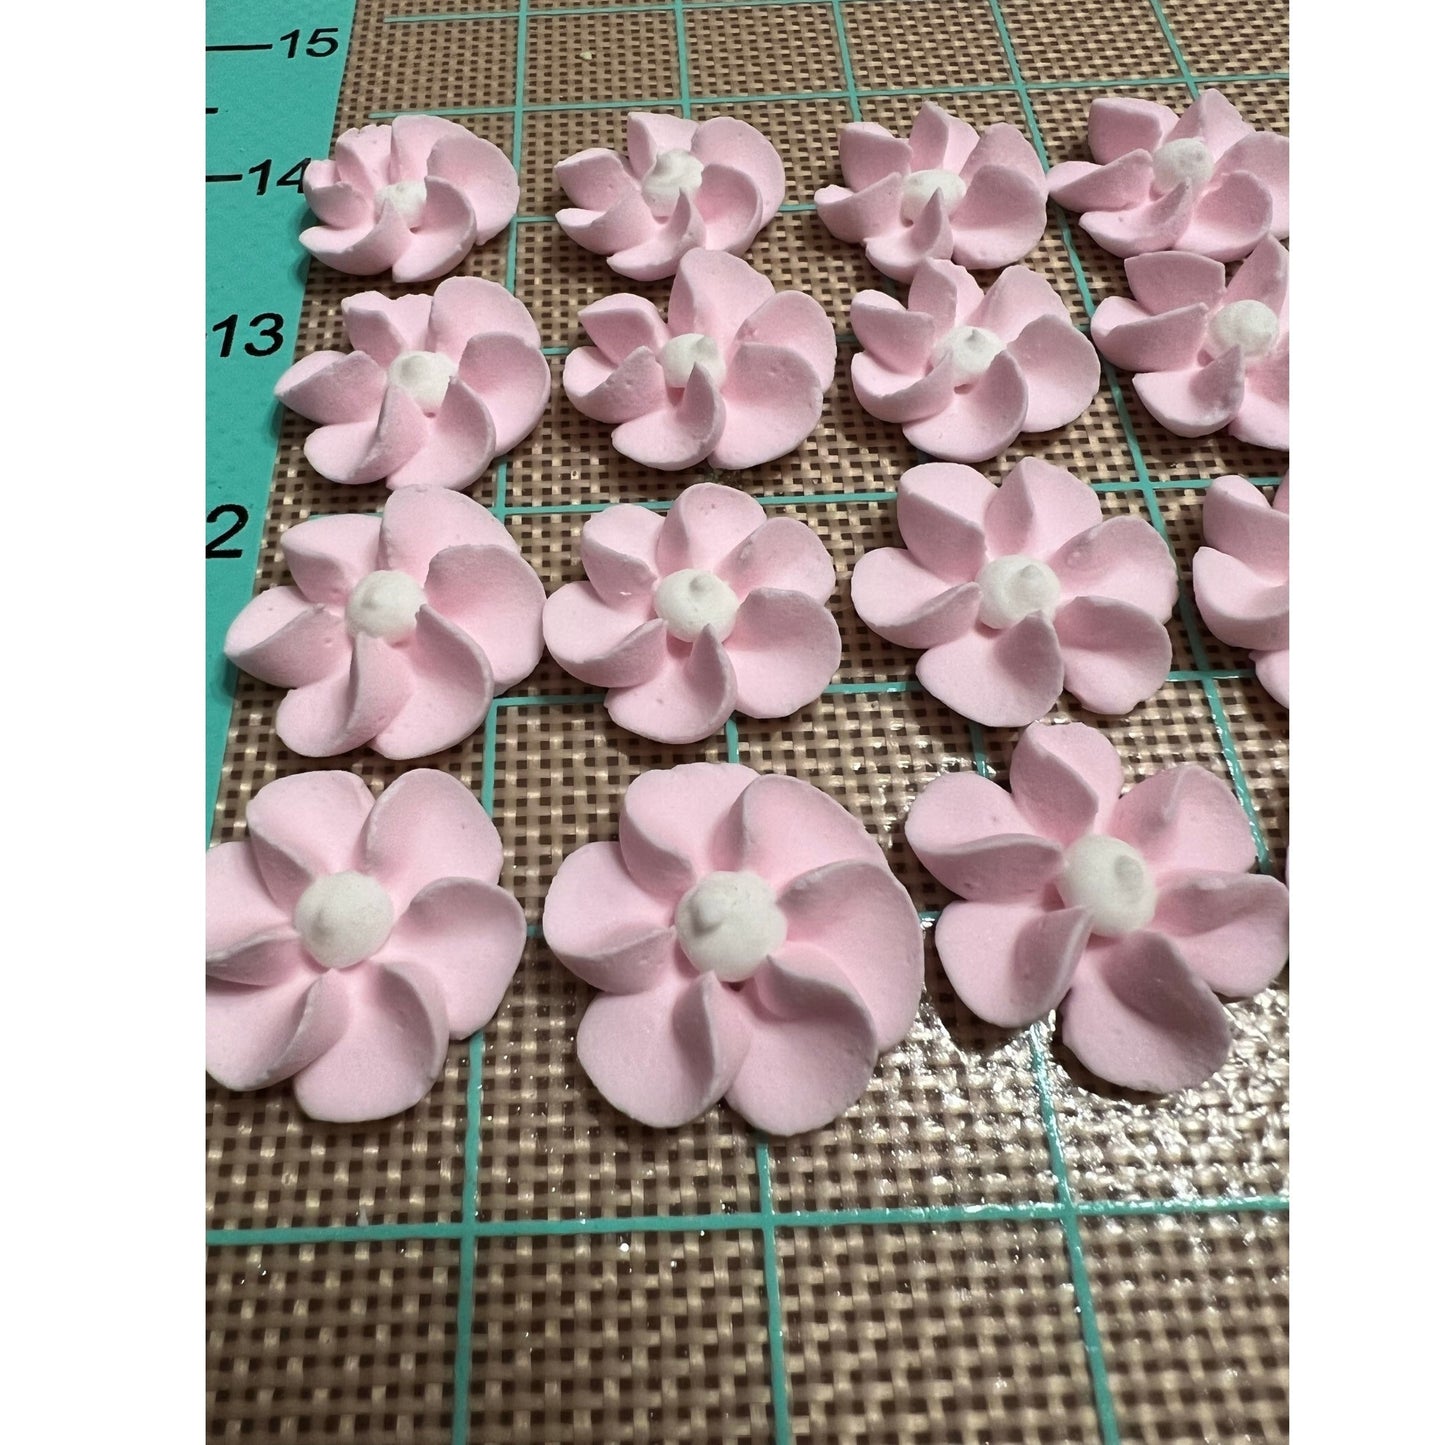 Royal Icing Flowers  Large Soft Pink Edible Drop Flowers  Sugar Flowers for Cake Decorating